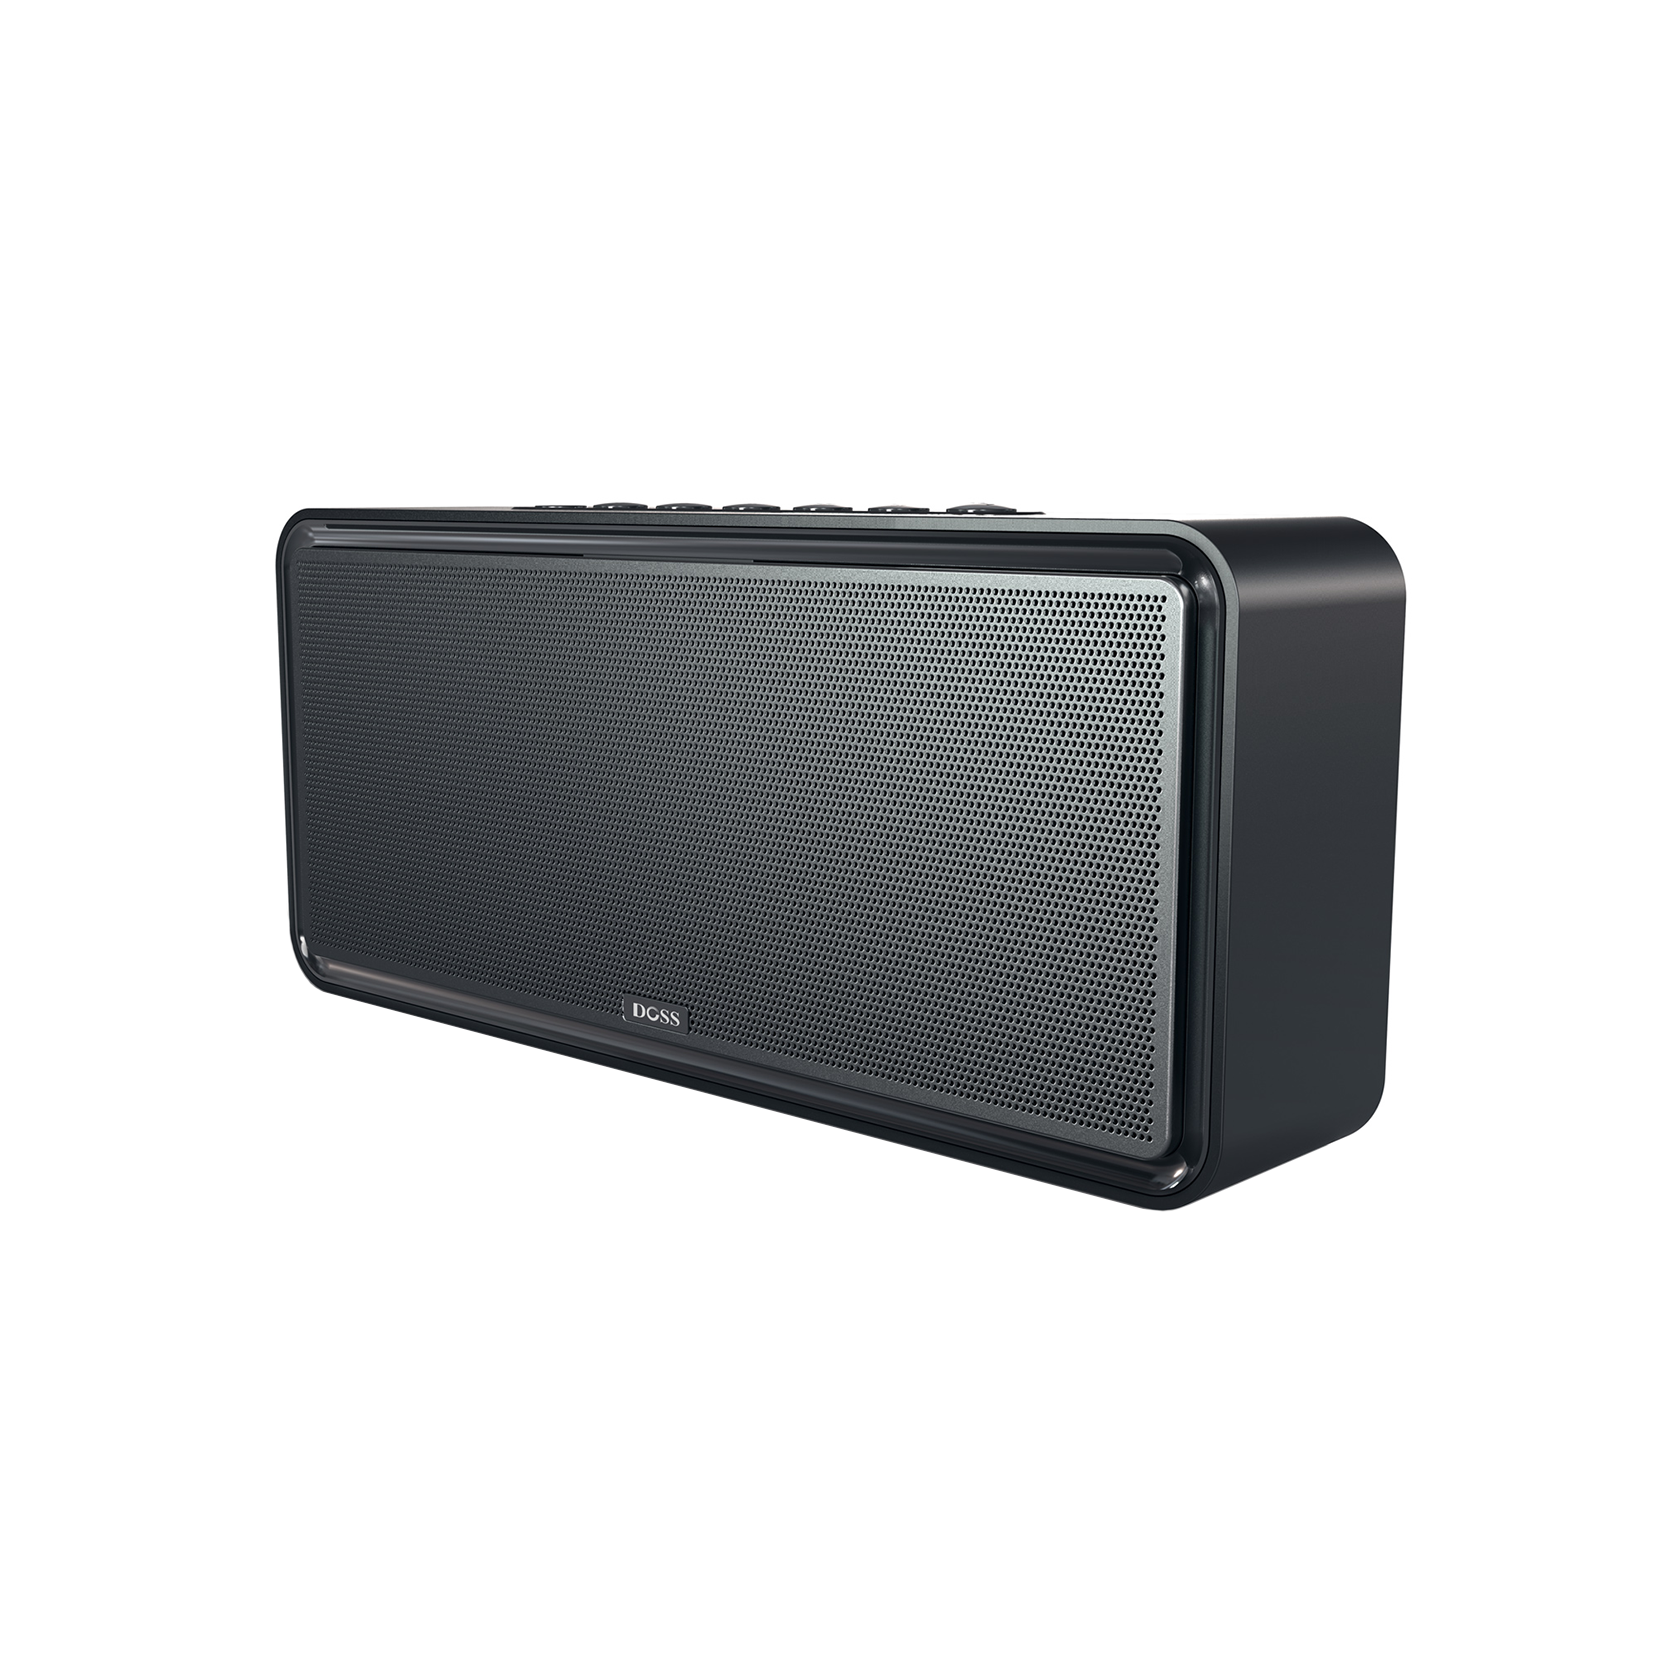 Home Audios and Outdoor Bluetooth Speakers | DOSS Audio